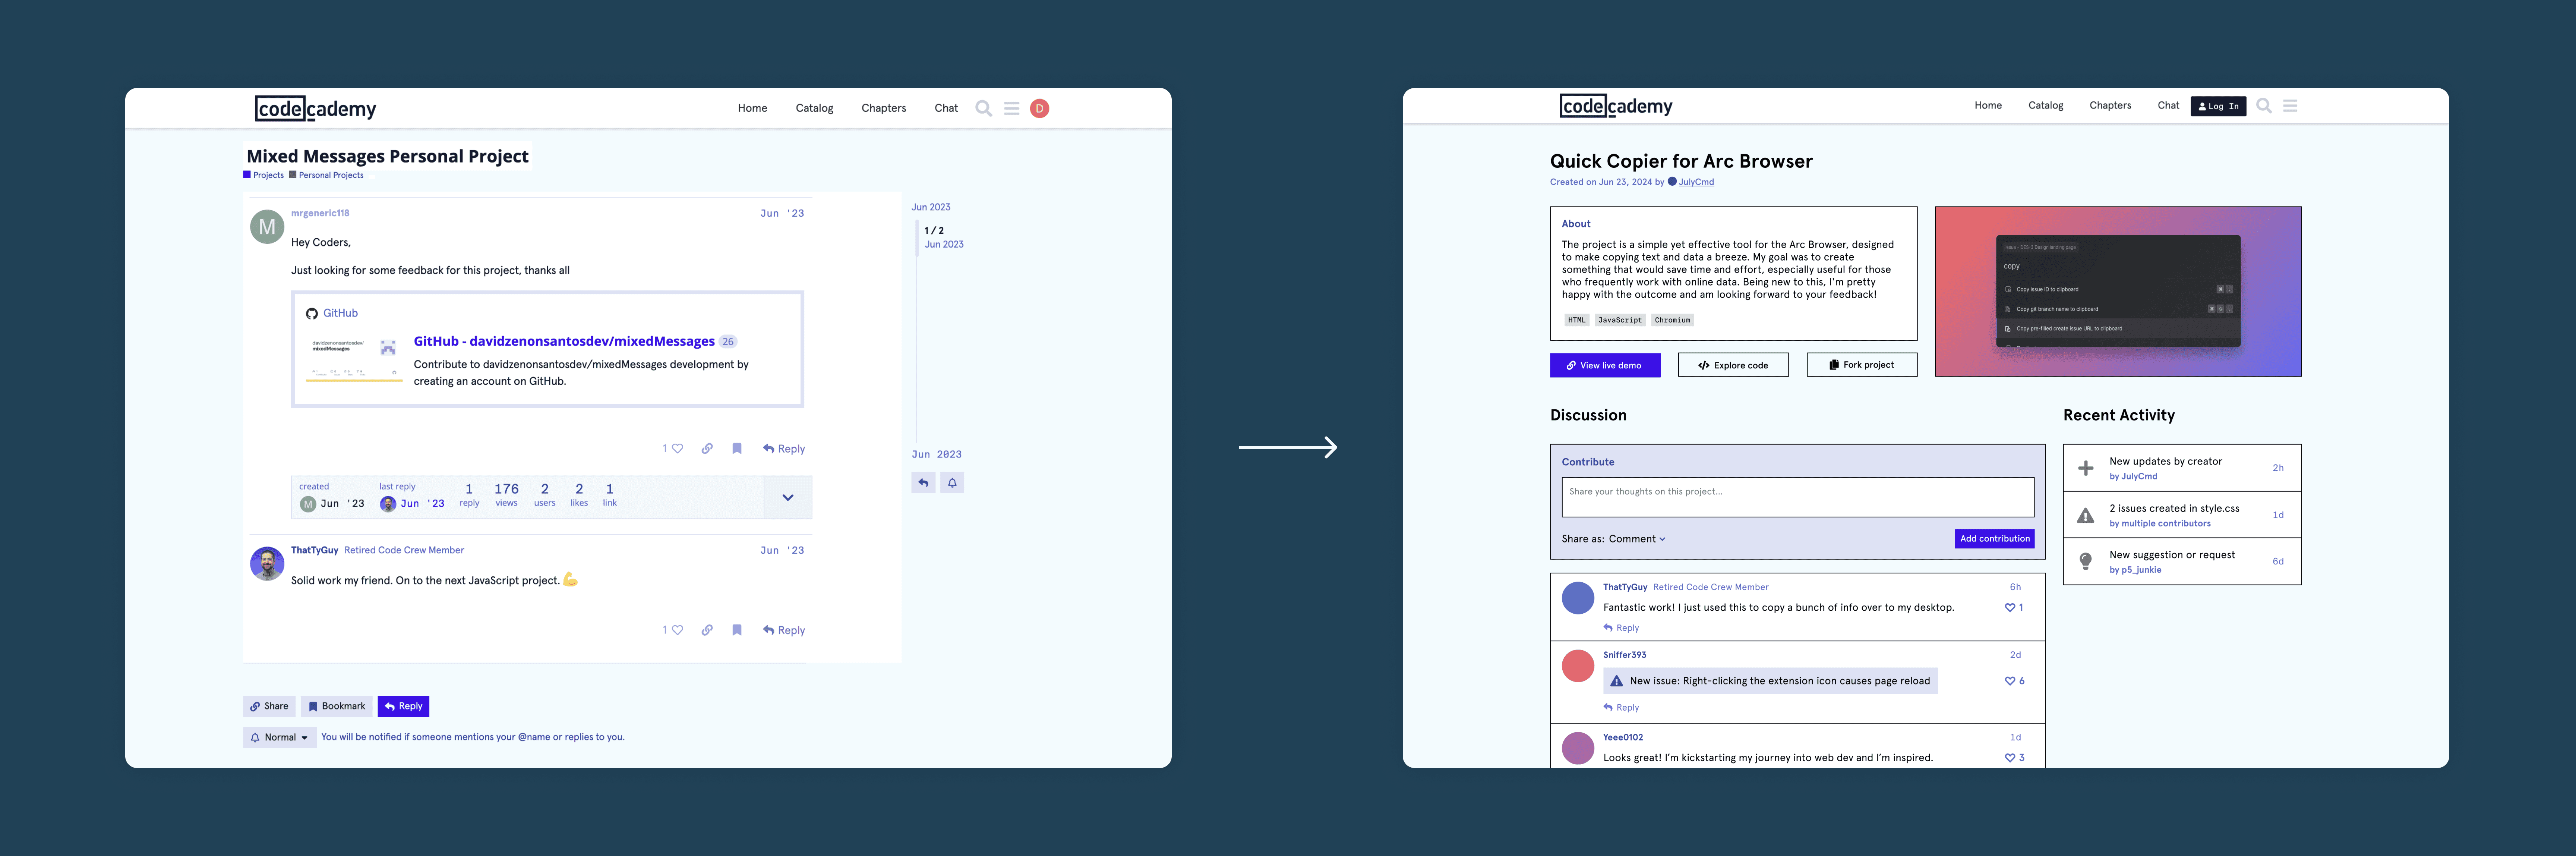 Comparison of Project Page